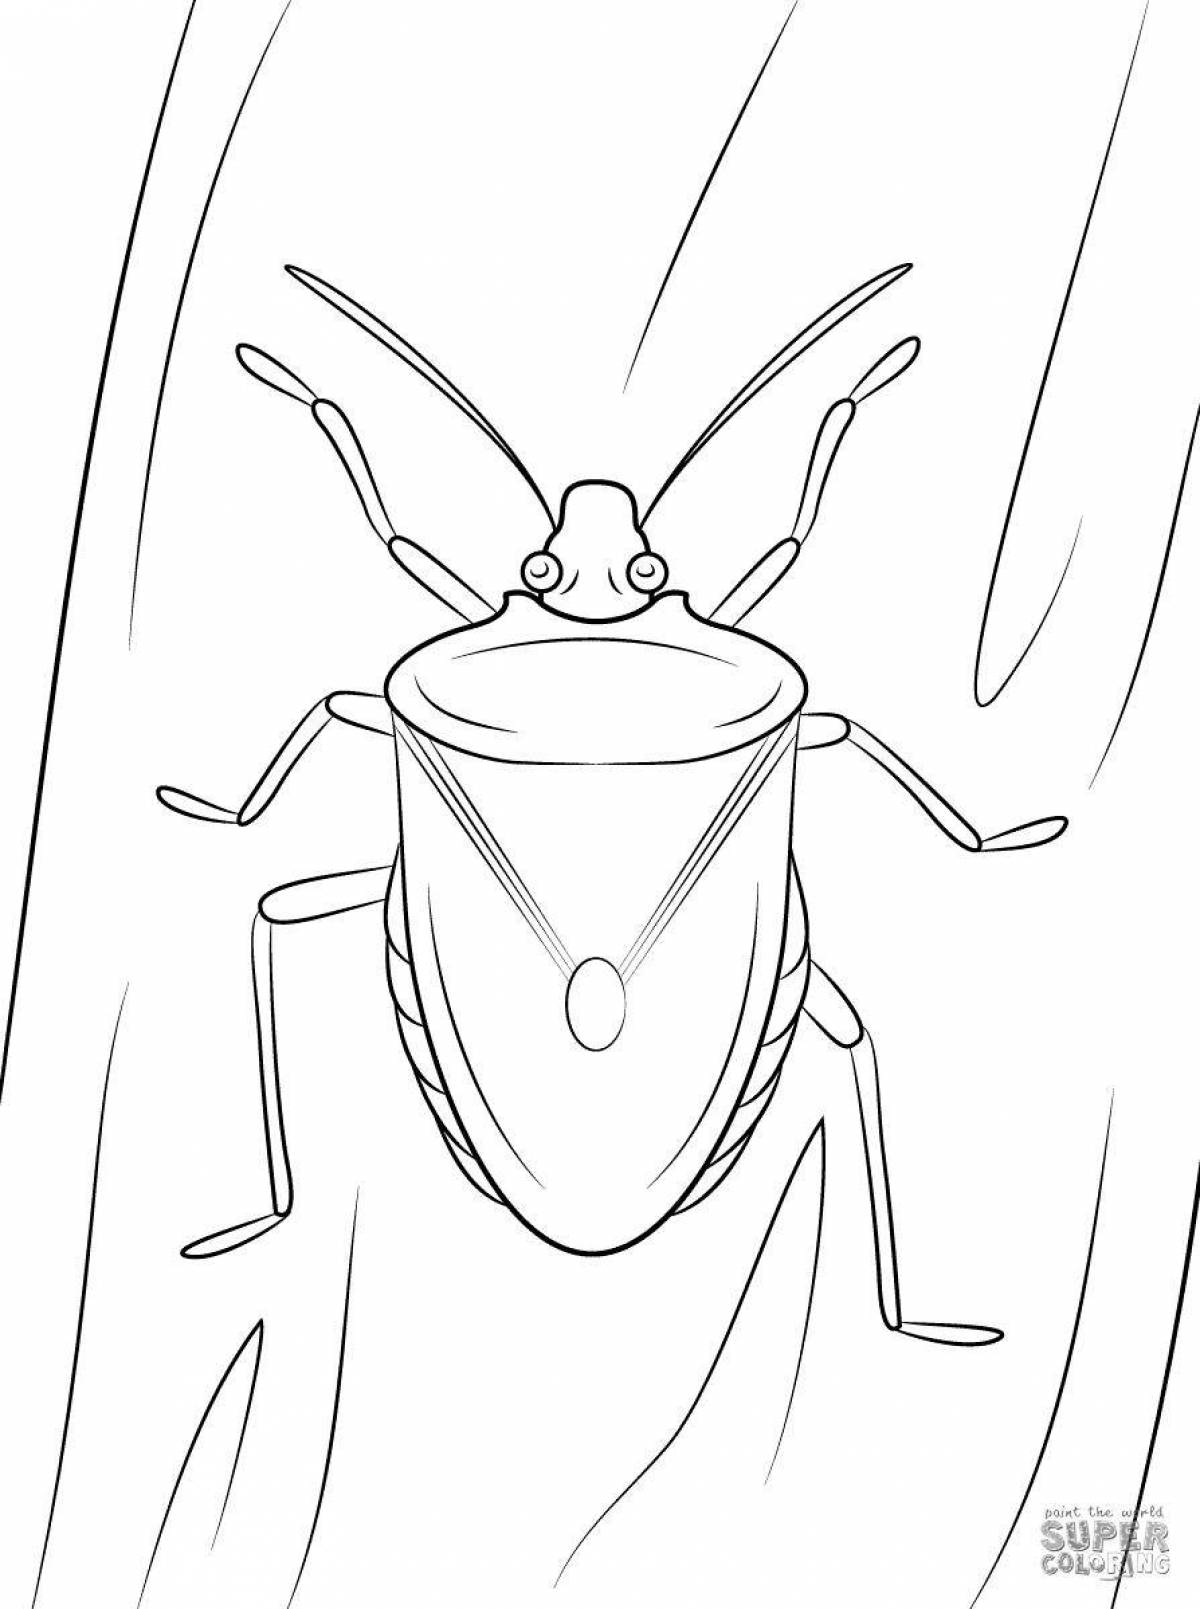 Fun beetle coloring book for 3-4 year olds